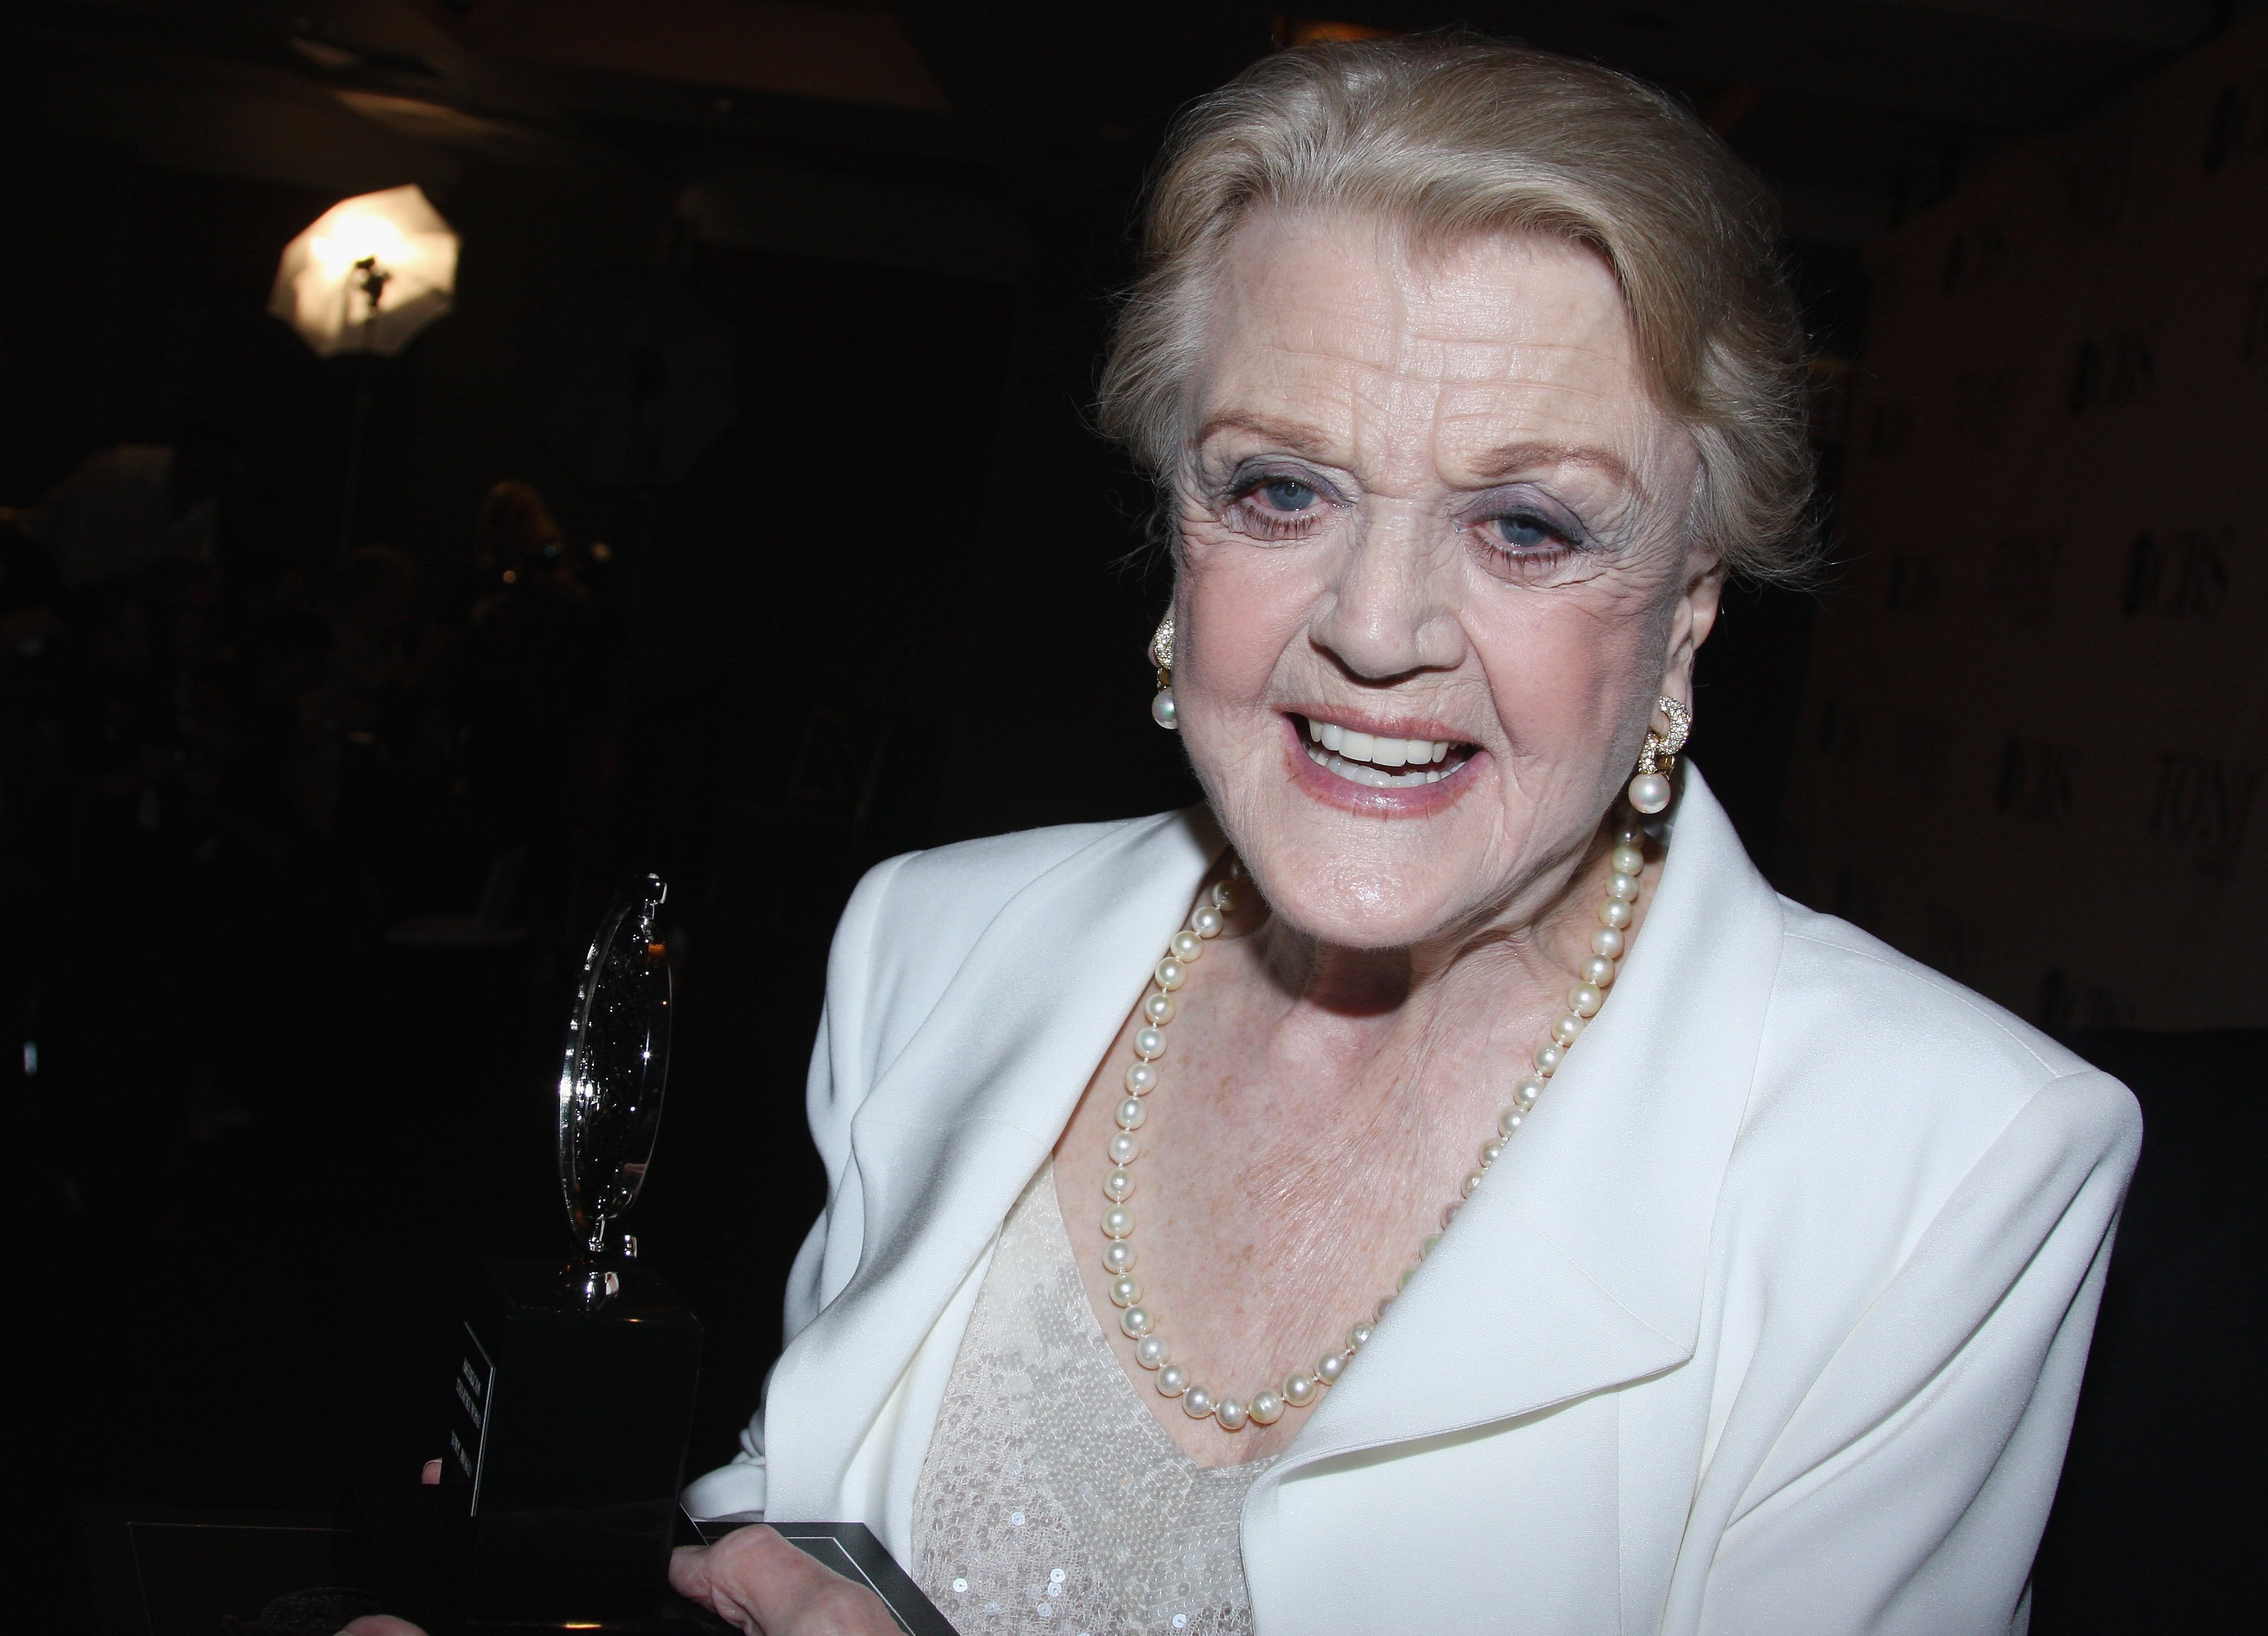 Angela Lansbury smiles and wears a white blazer with pearls to the 2009 Tony Awards at Radio City Musical Hall. 